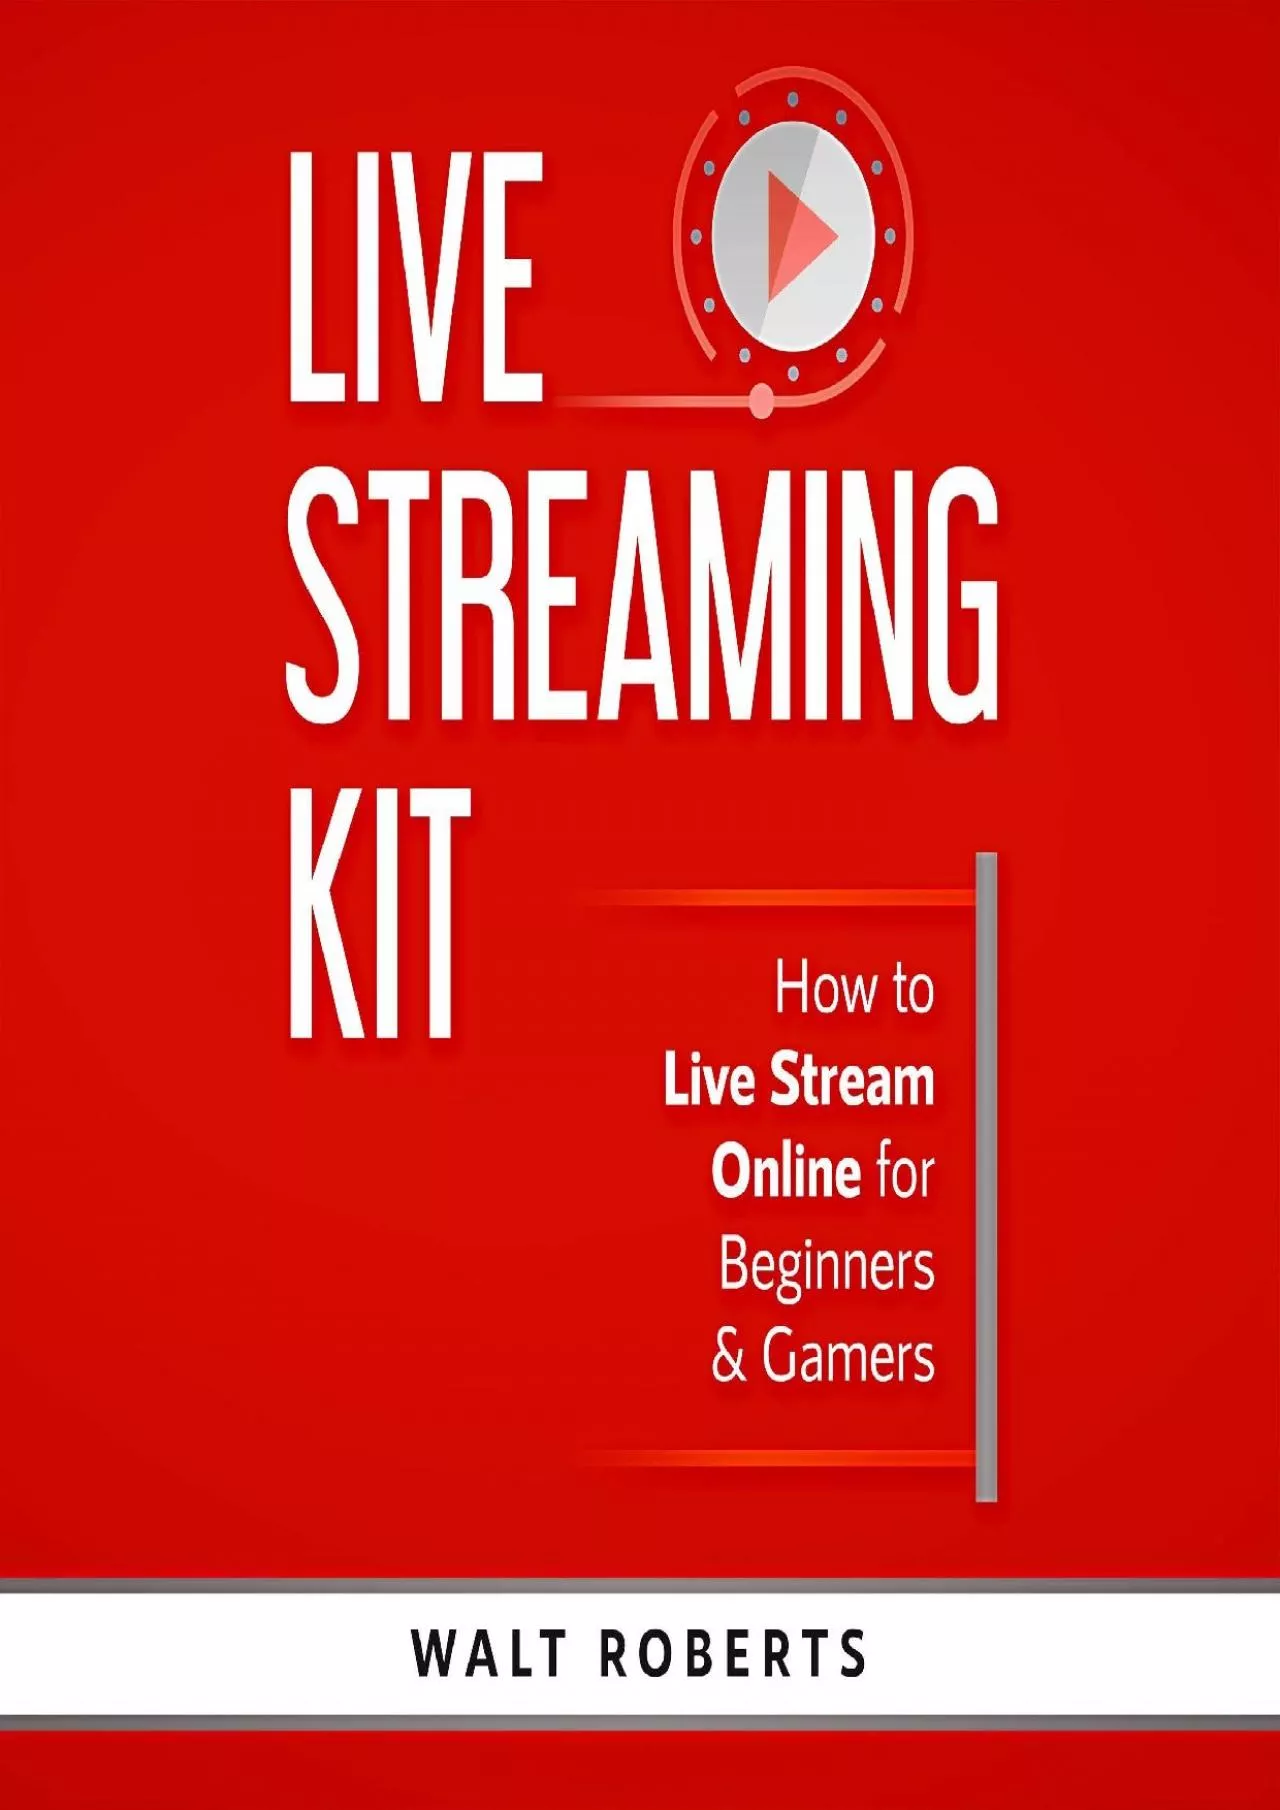 Live Streaming Kit: How to Live Stream Online for Beginners & Gamers (Live Streaming Tech,